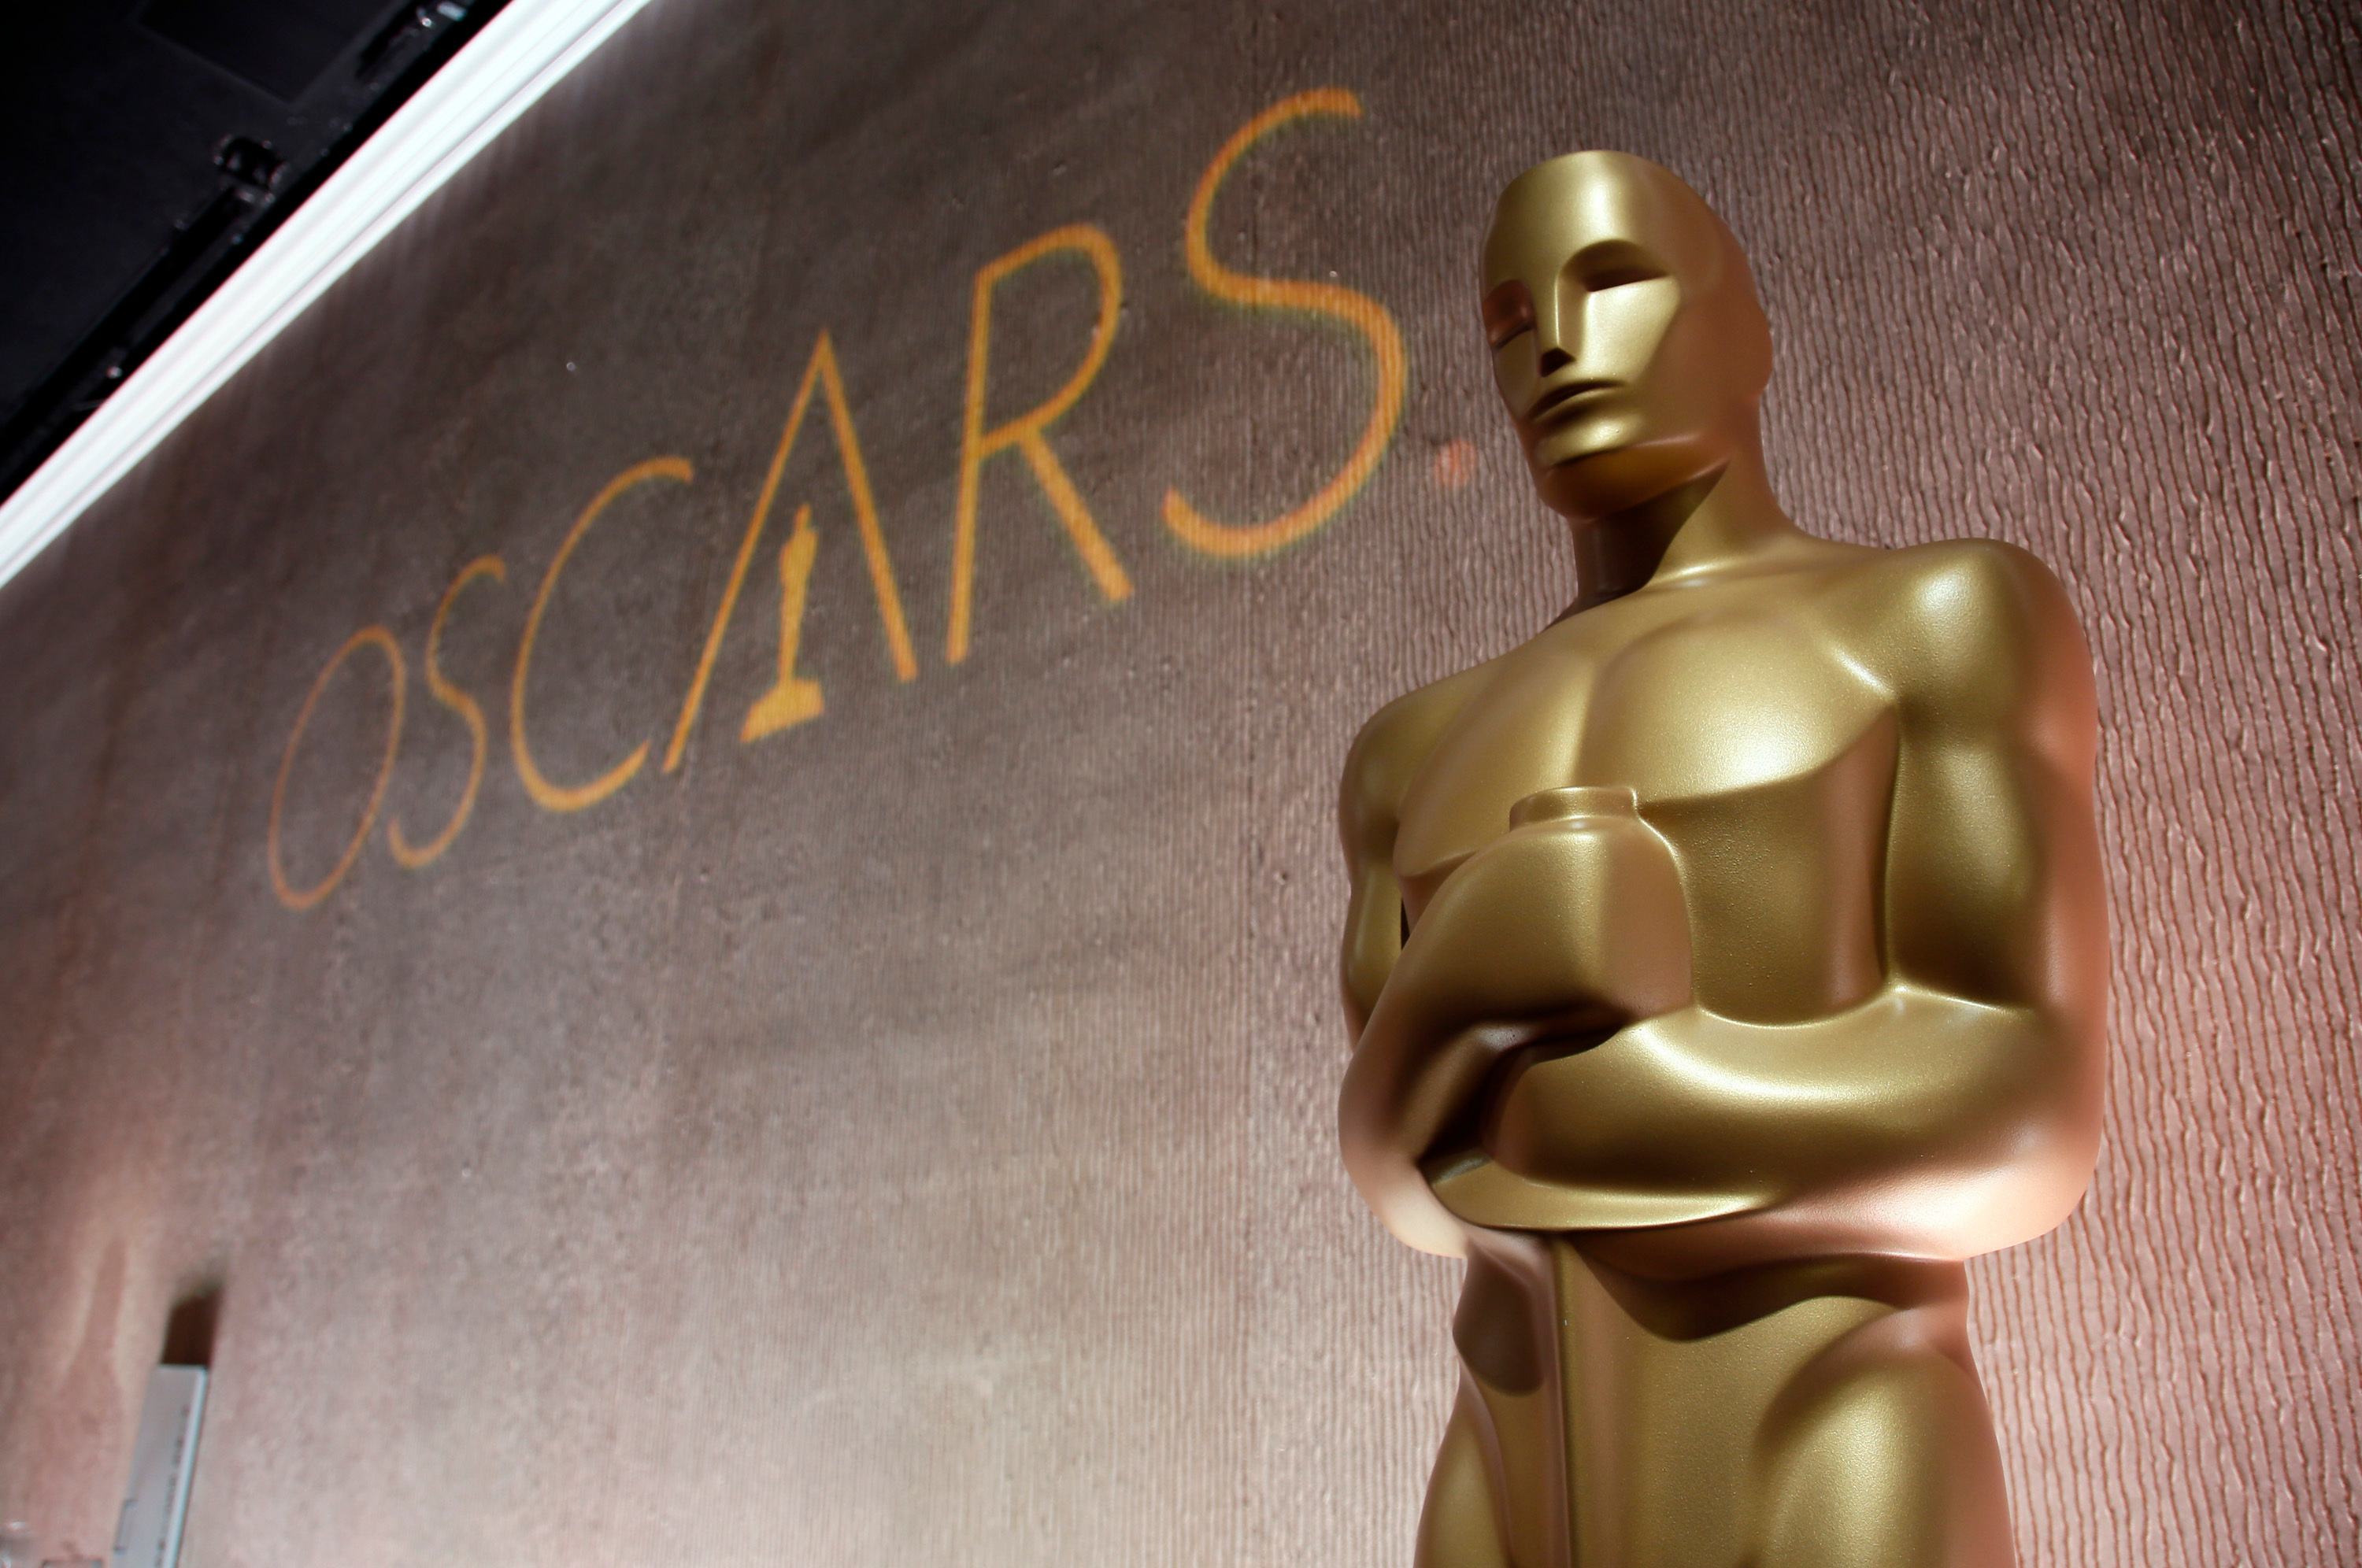 Oscars Nominations 2021 Livestream: How To Watch Online And Social